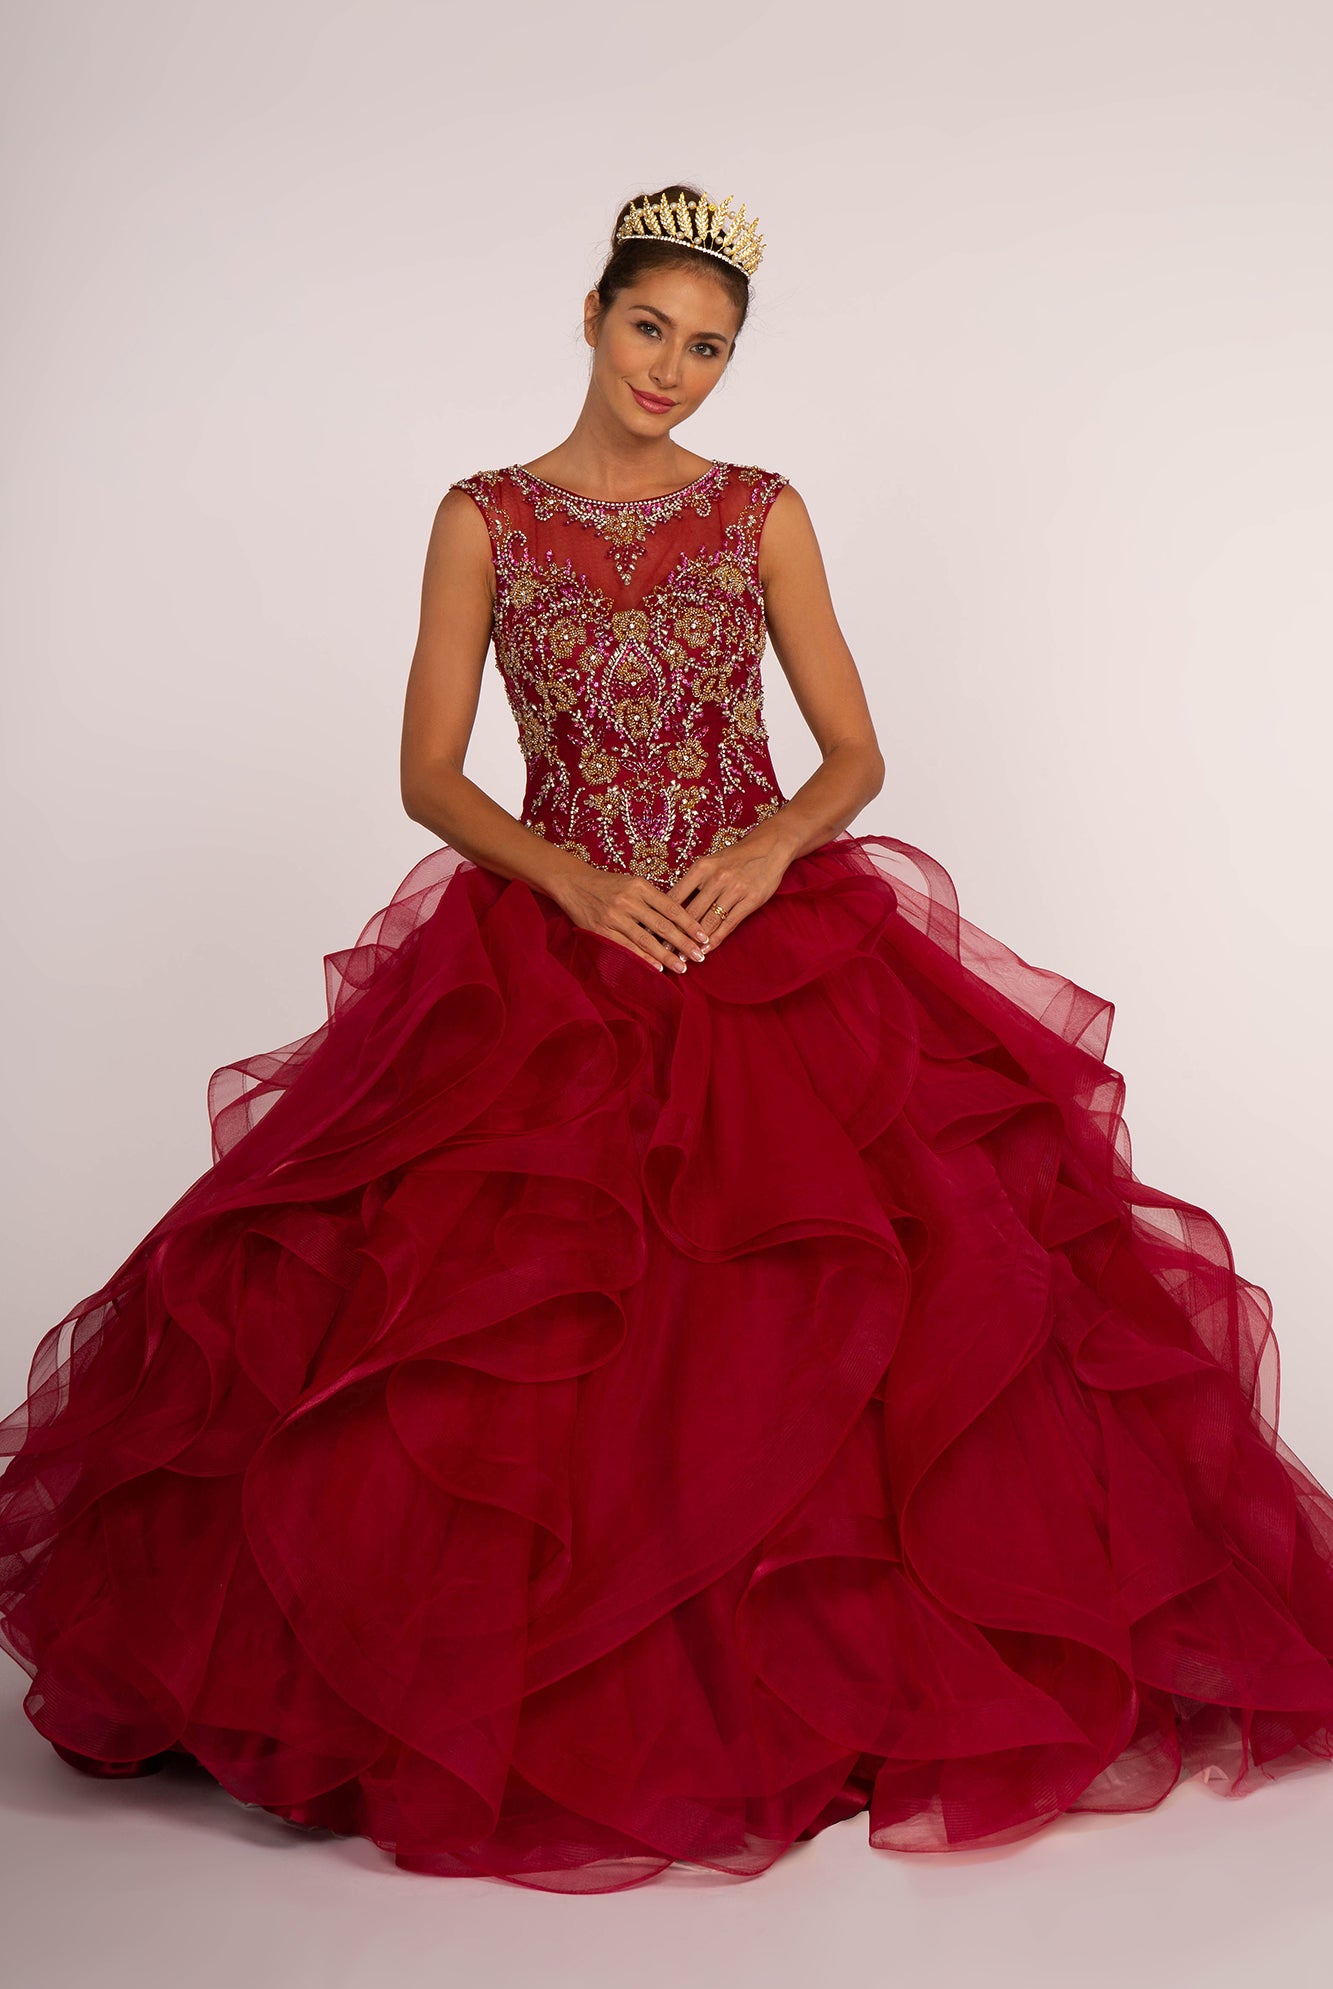 Beads Embellished Bodice Tulle Ball Gown-smcdress